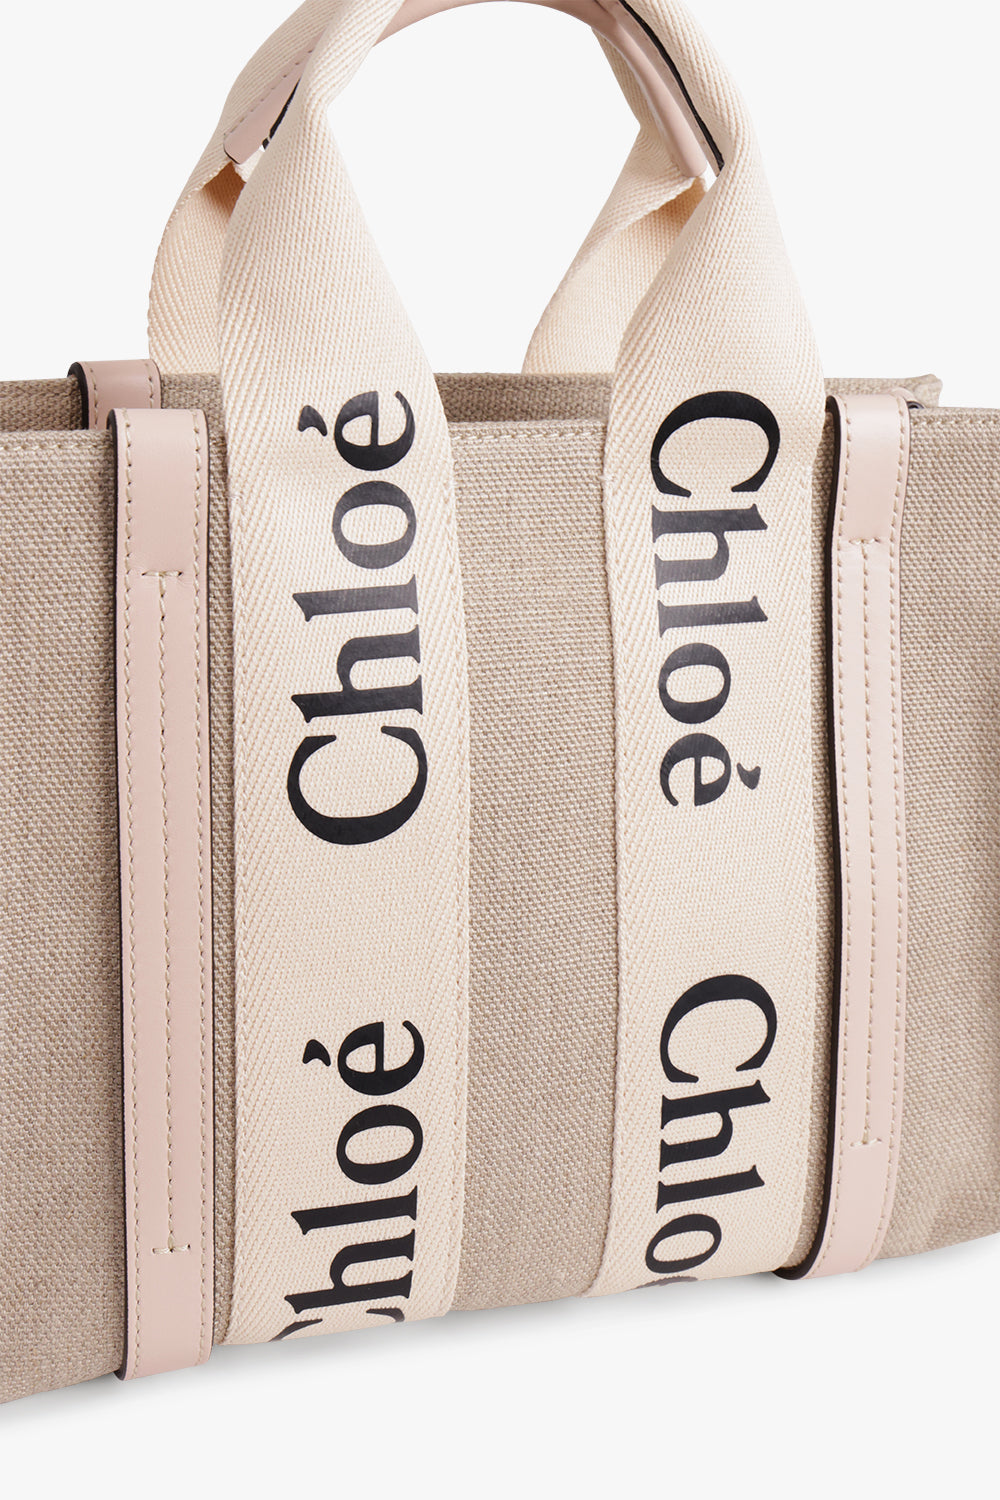 CHLOE BAGS Pink Woody Small Tote | Cement Pink